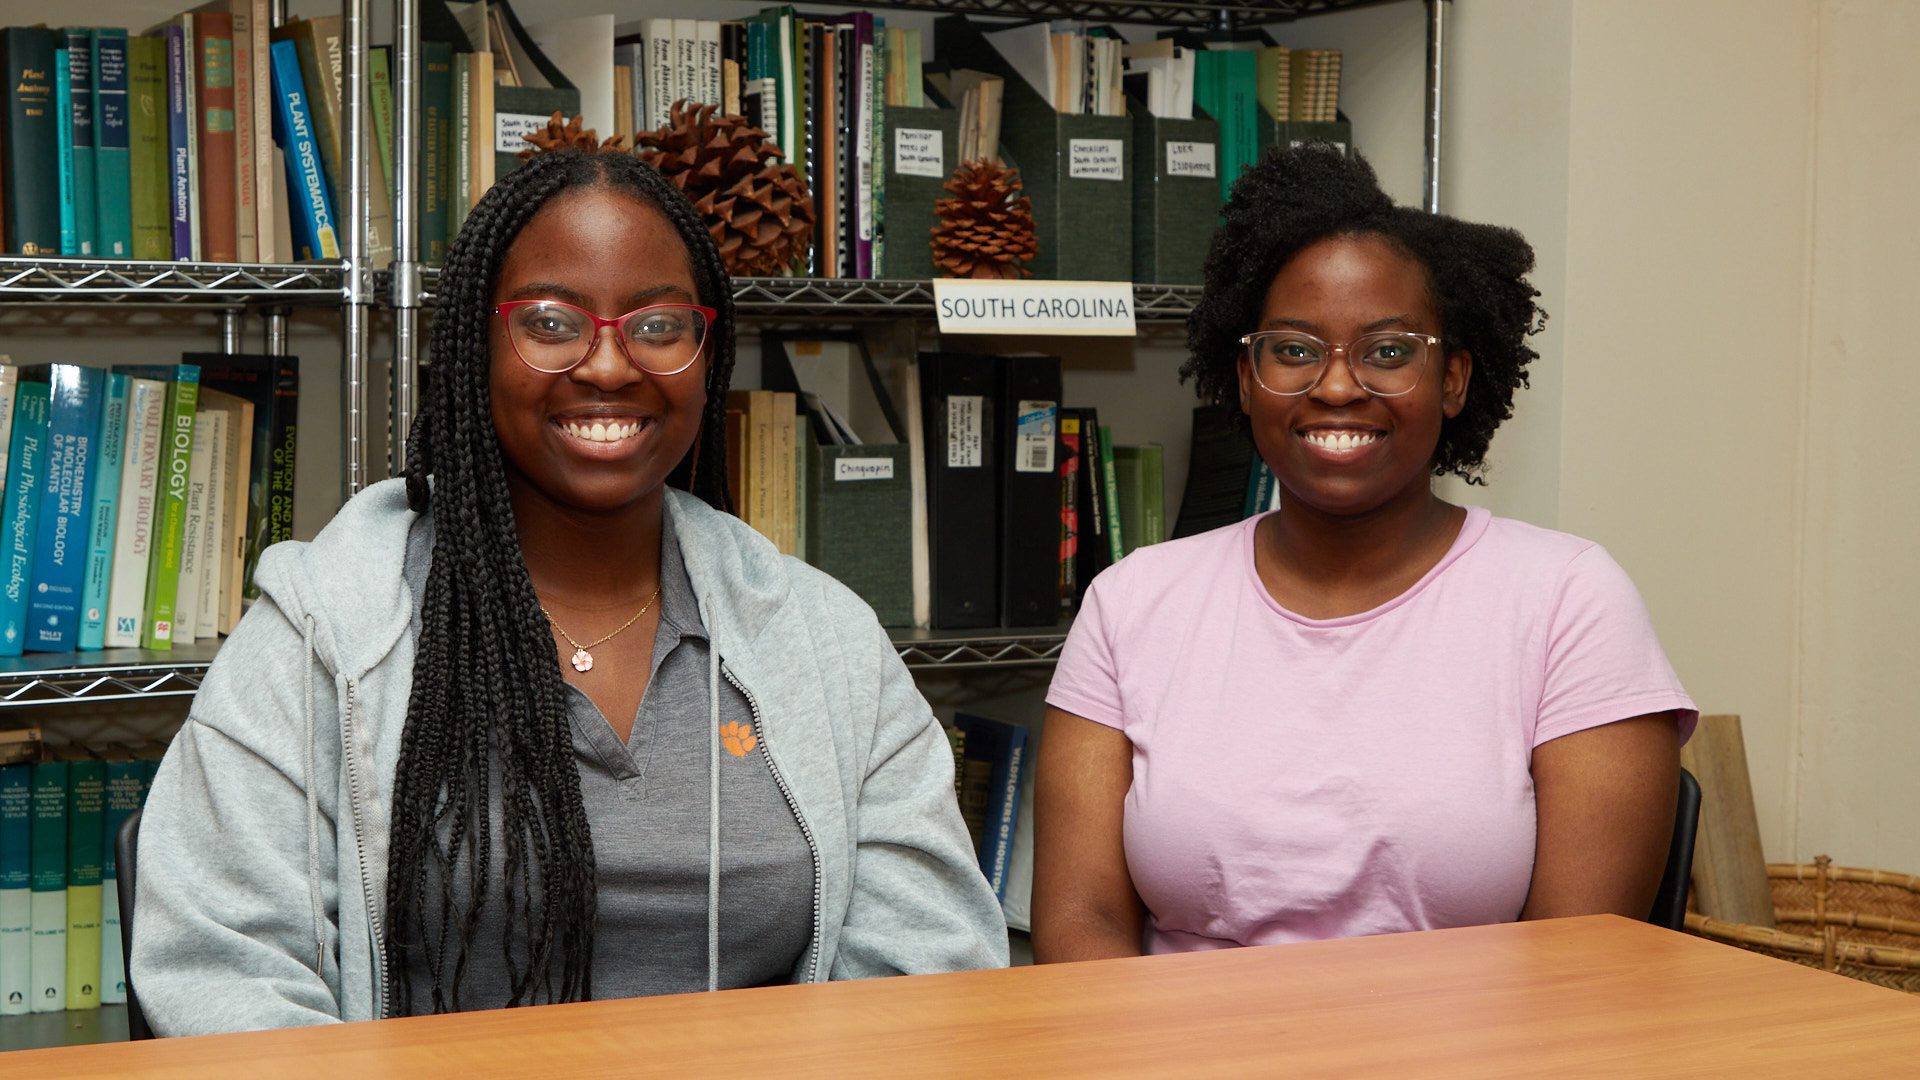 Two Black women are sitting at a table with a bookshelf full of books behind them.